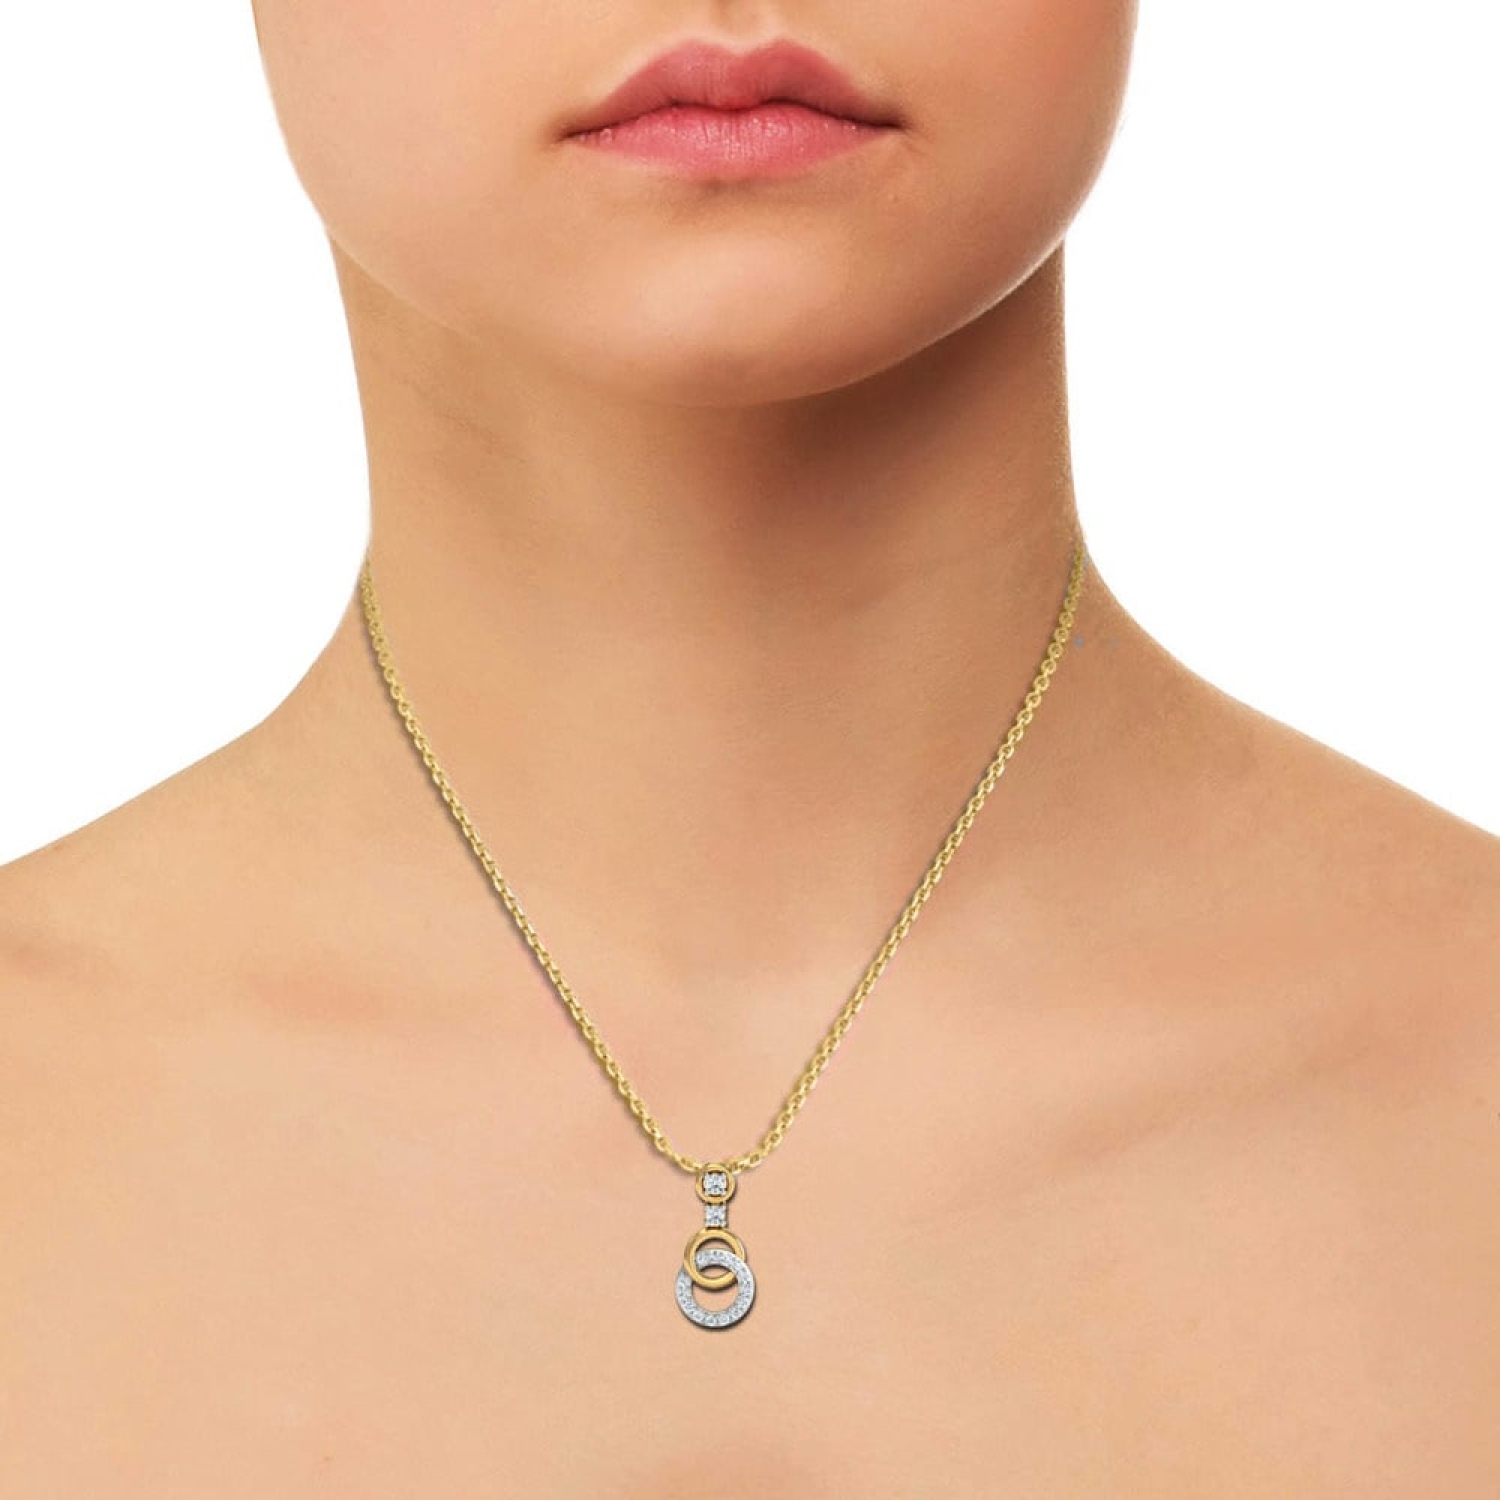 Buy Jewelry Bliss 10k White Gold Chain & Oval Pendant With Genuine Blue  Aquamarine & Diamond March Birthstone Necklace For Women - Ideal for  Birthday, Anniversary, Valentine's, Mother's day -18 Inch Chain,